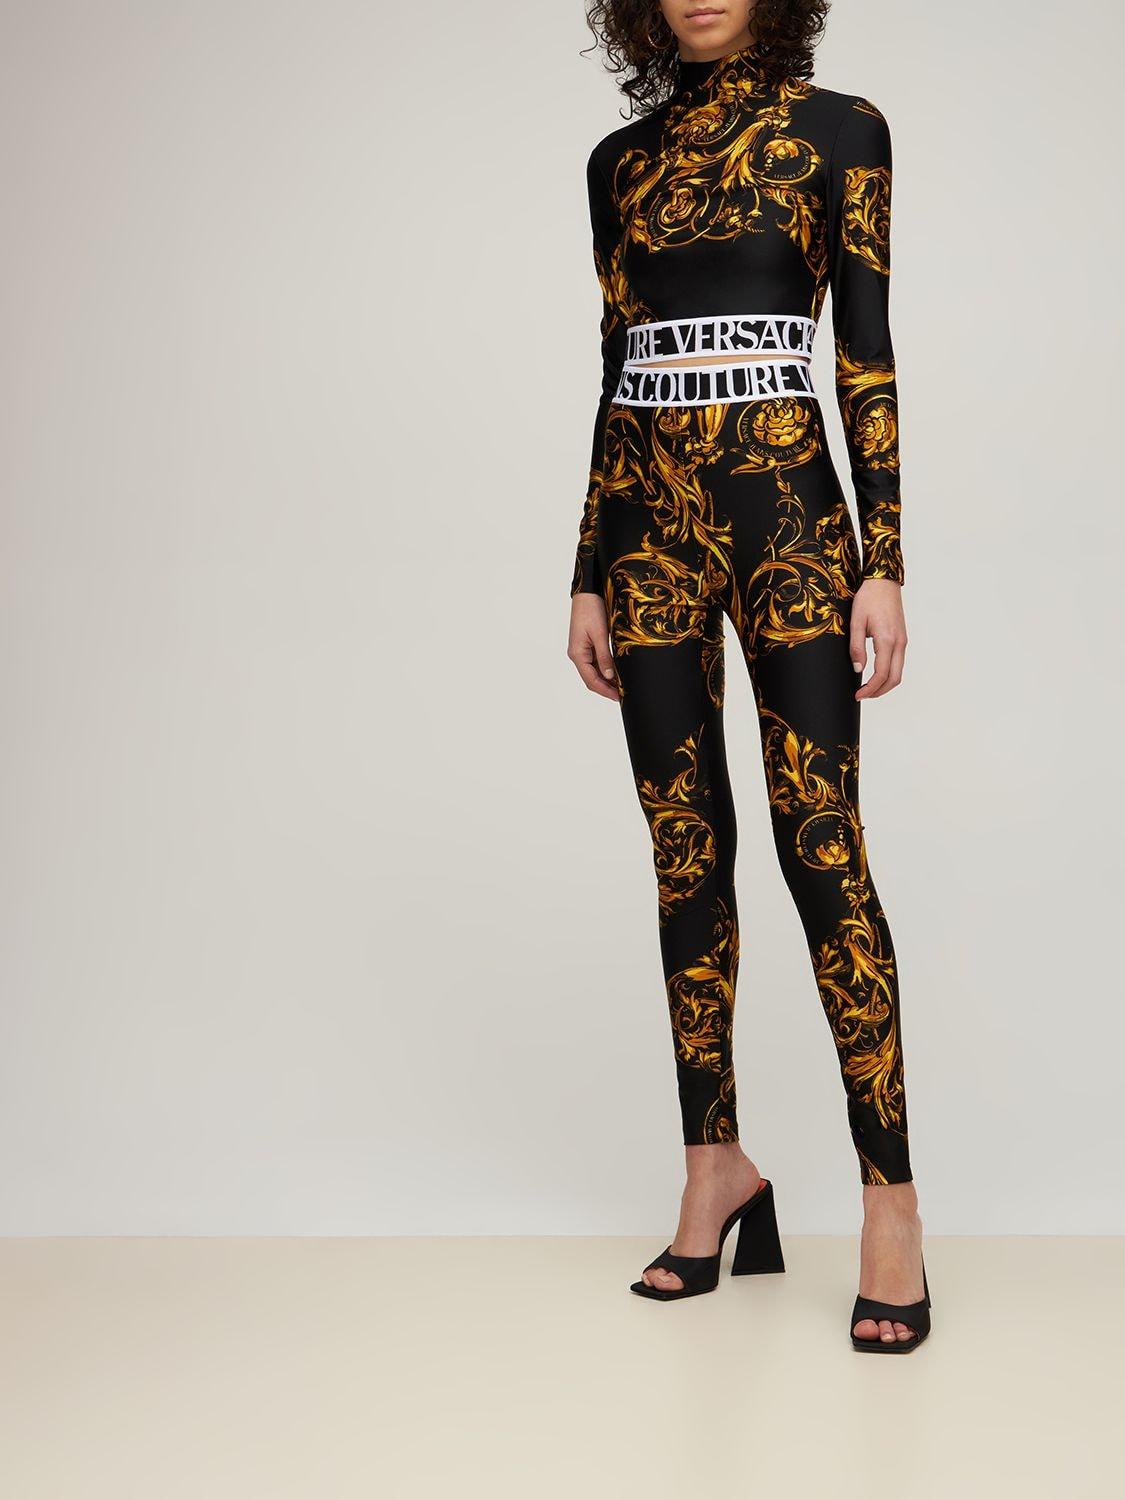 Patterned leggings Versace Jeans Couture - Han har at shorts